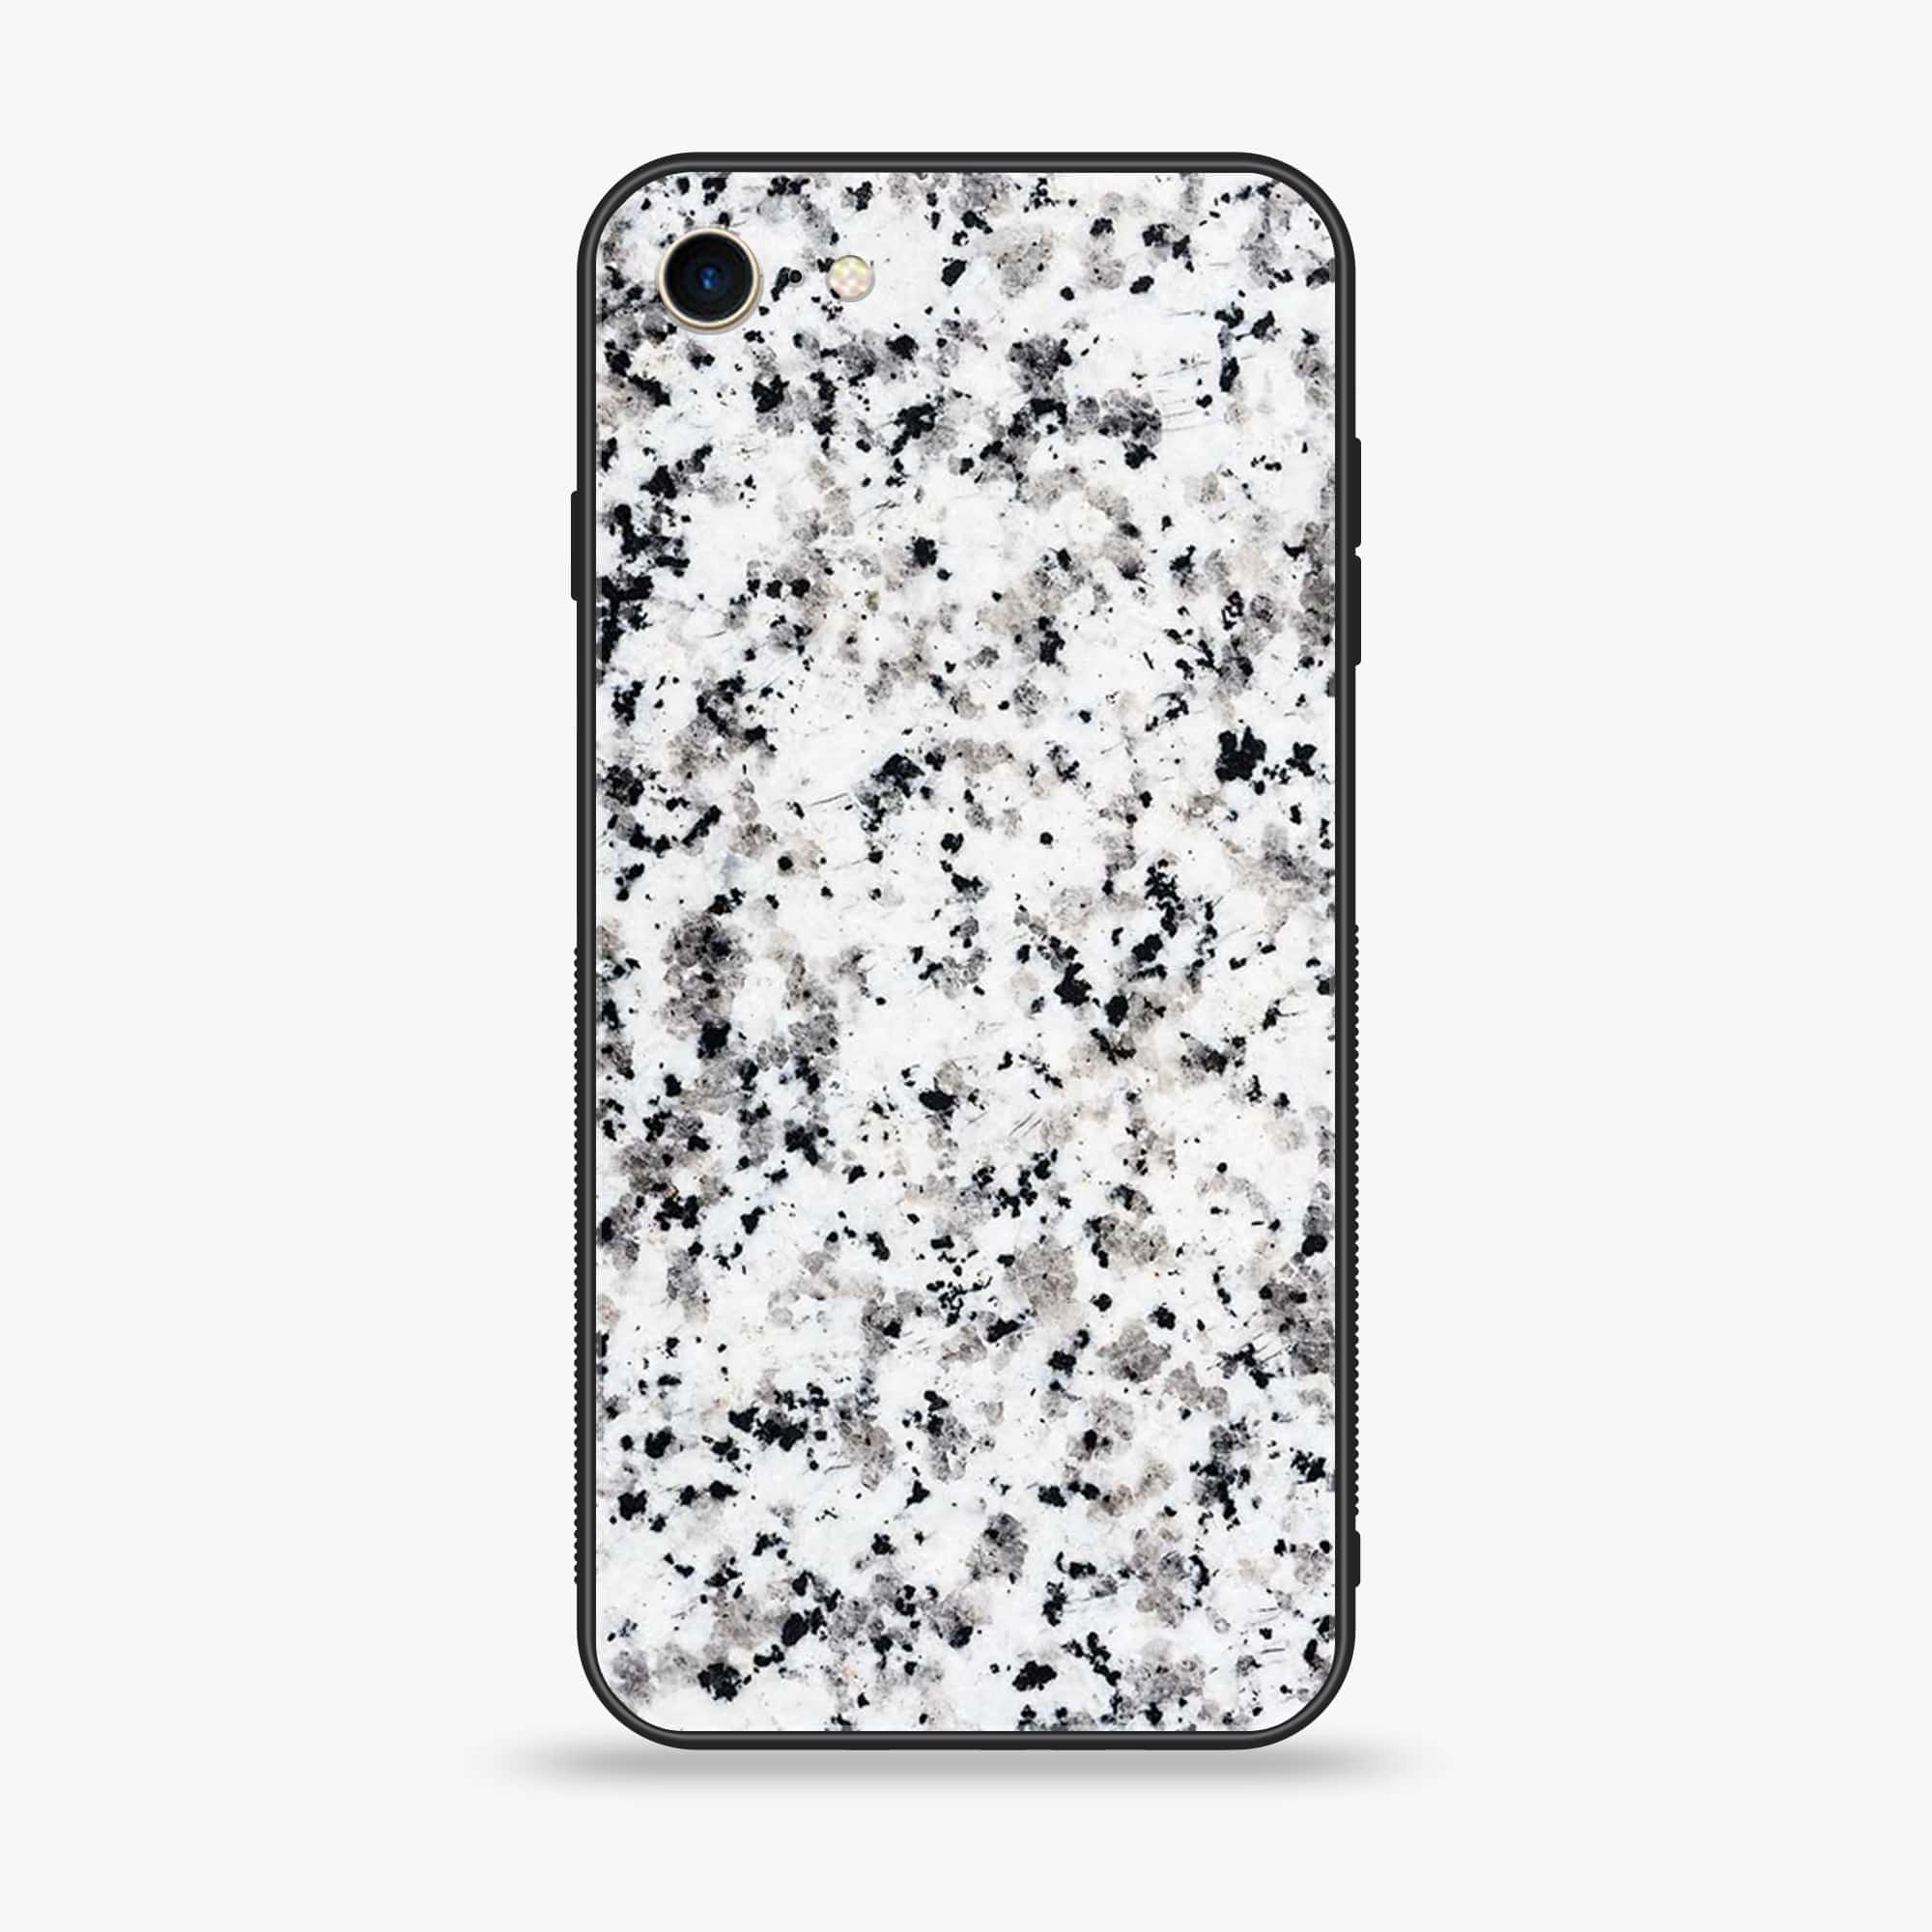 iPhone 6 - White Marble Series - Premium Printed Glass soft Bumper shock Proof Case